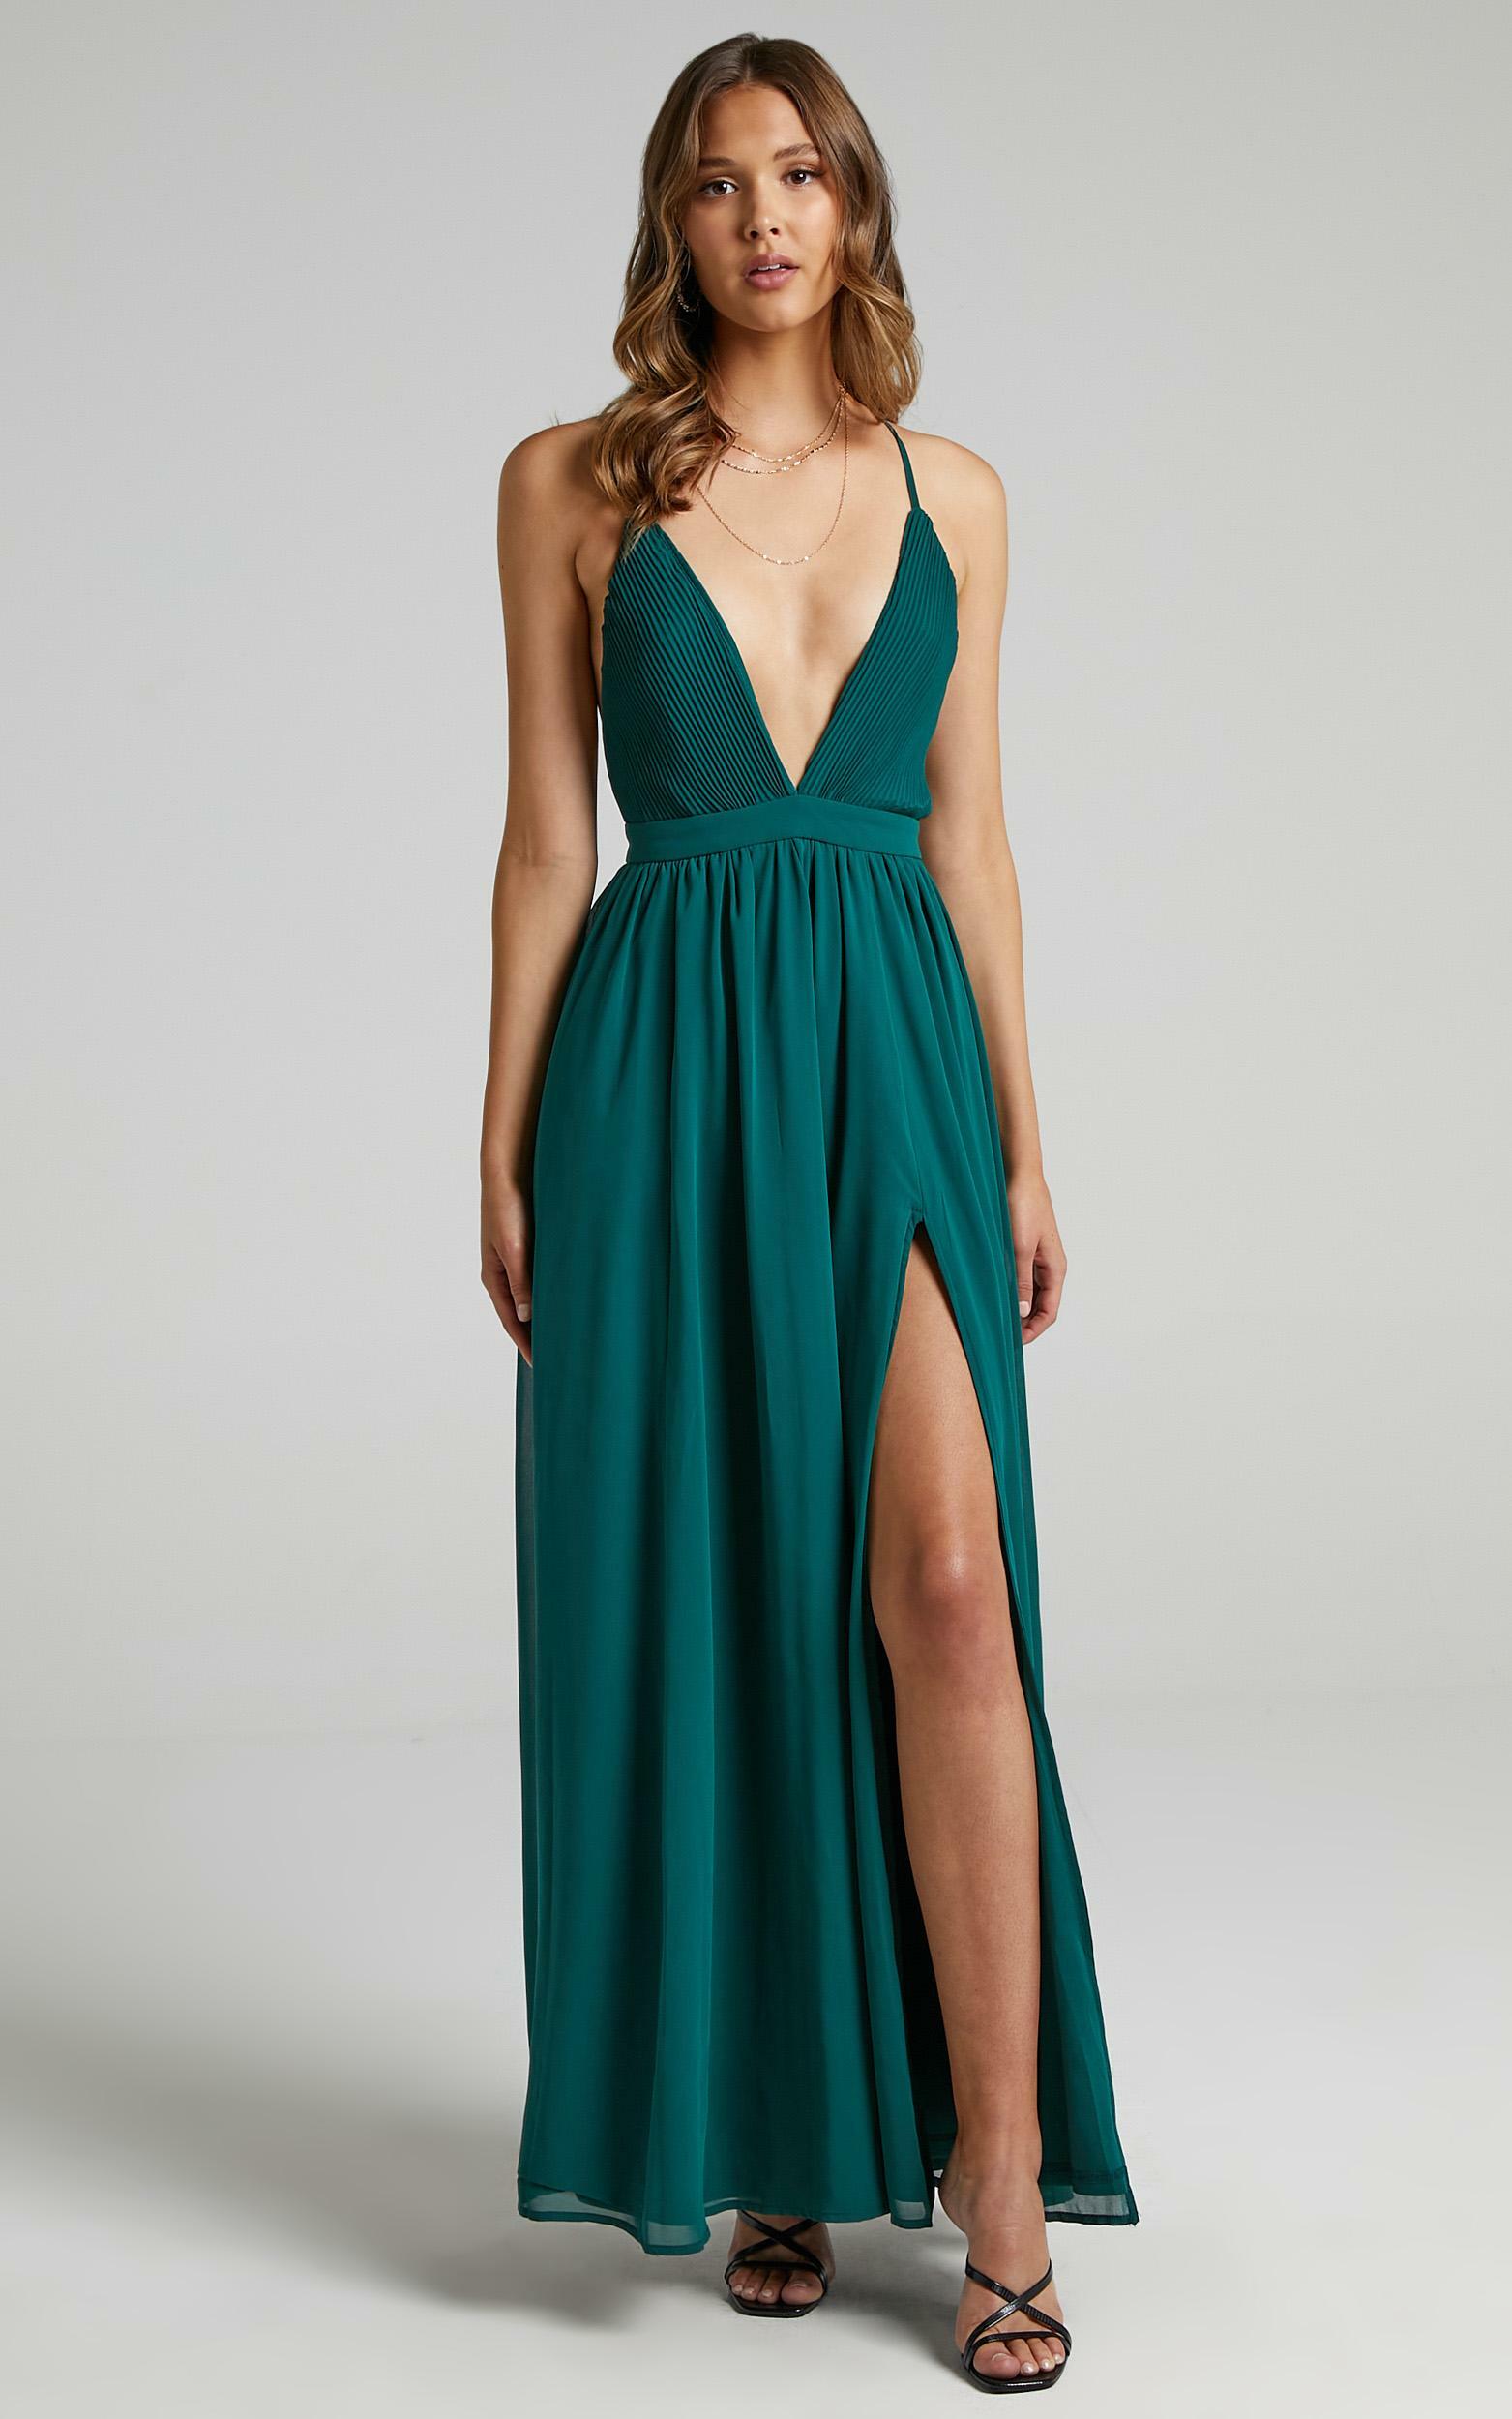 Shes A Delight Maxi Dress in Emerald - 06, GRN2, hi-res image number null